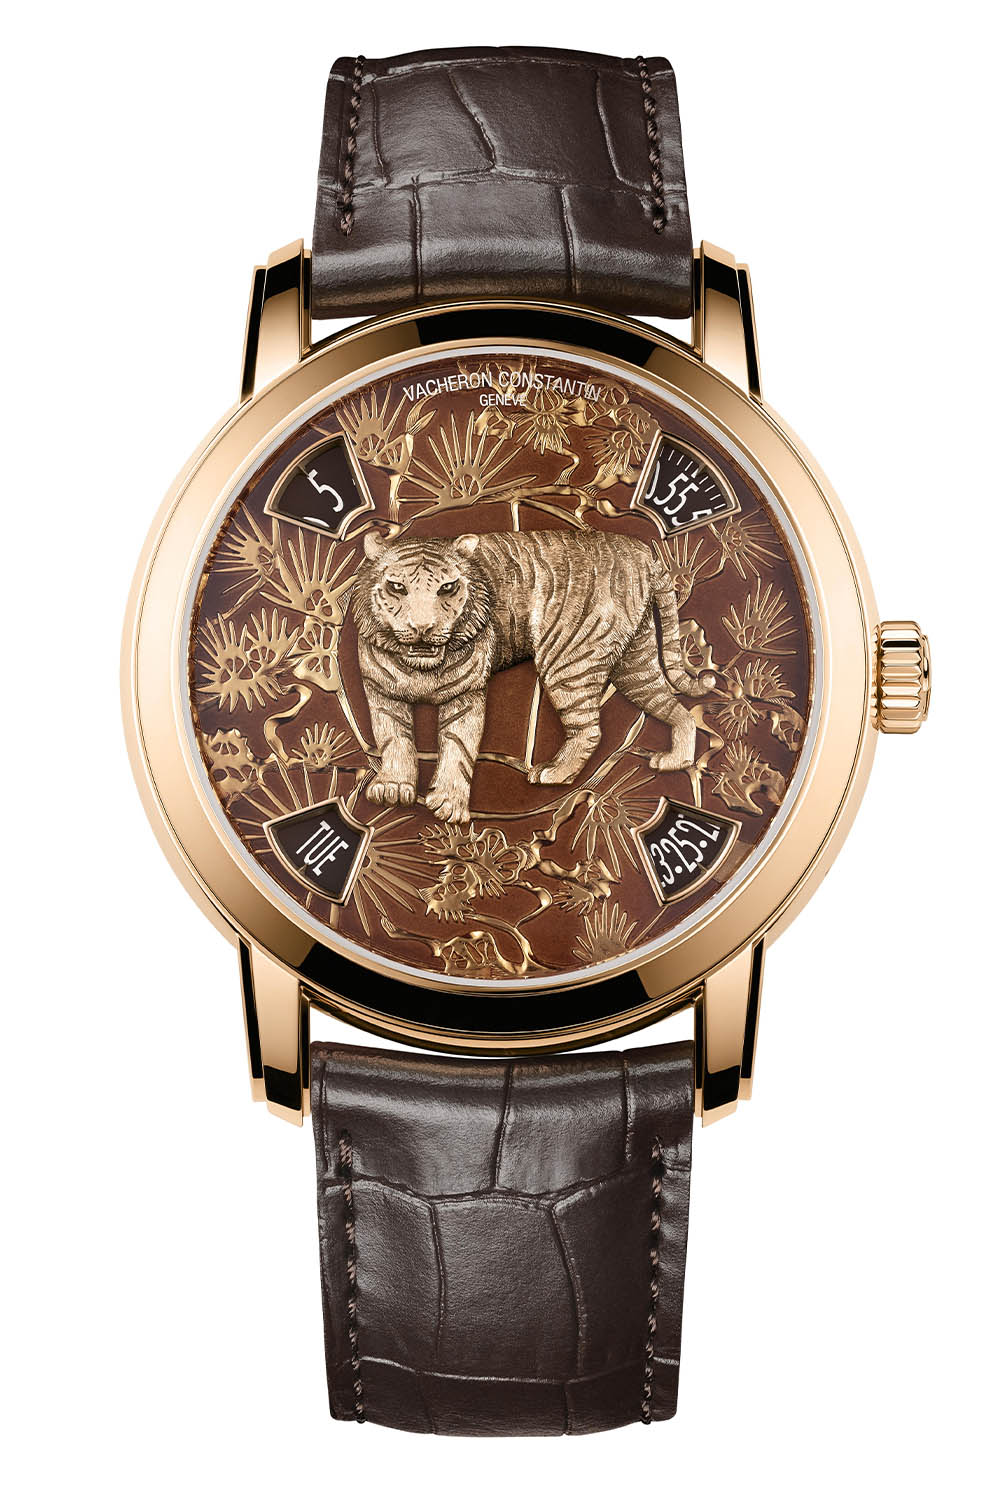 Vacheron Constantin Metiers d’Art The legend of the Chinese zodiac - Year of the tiger